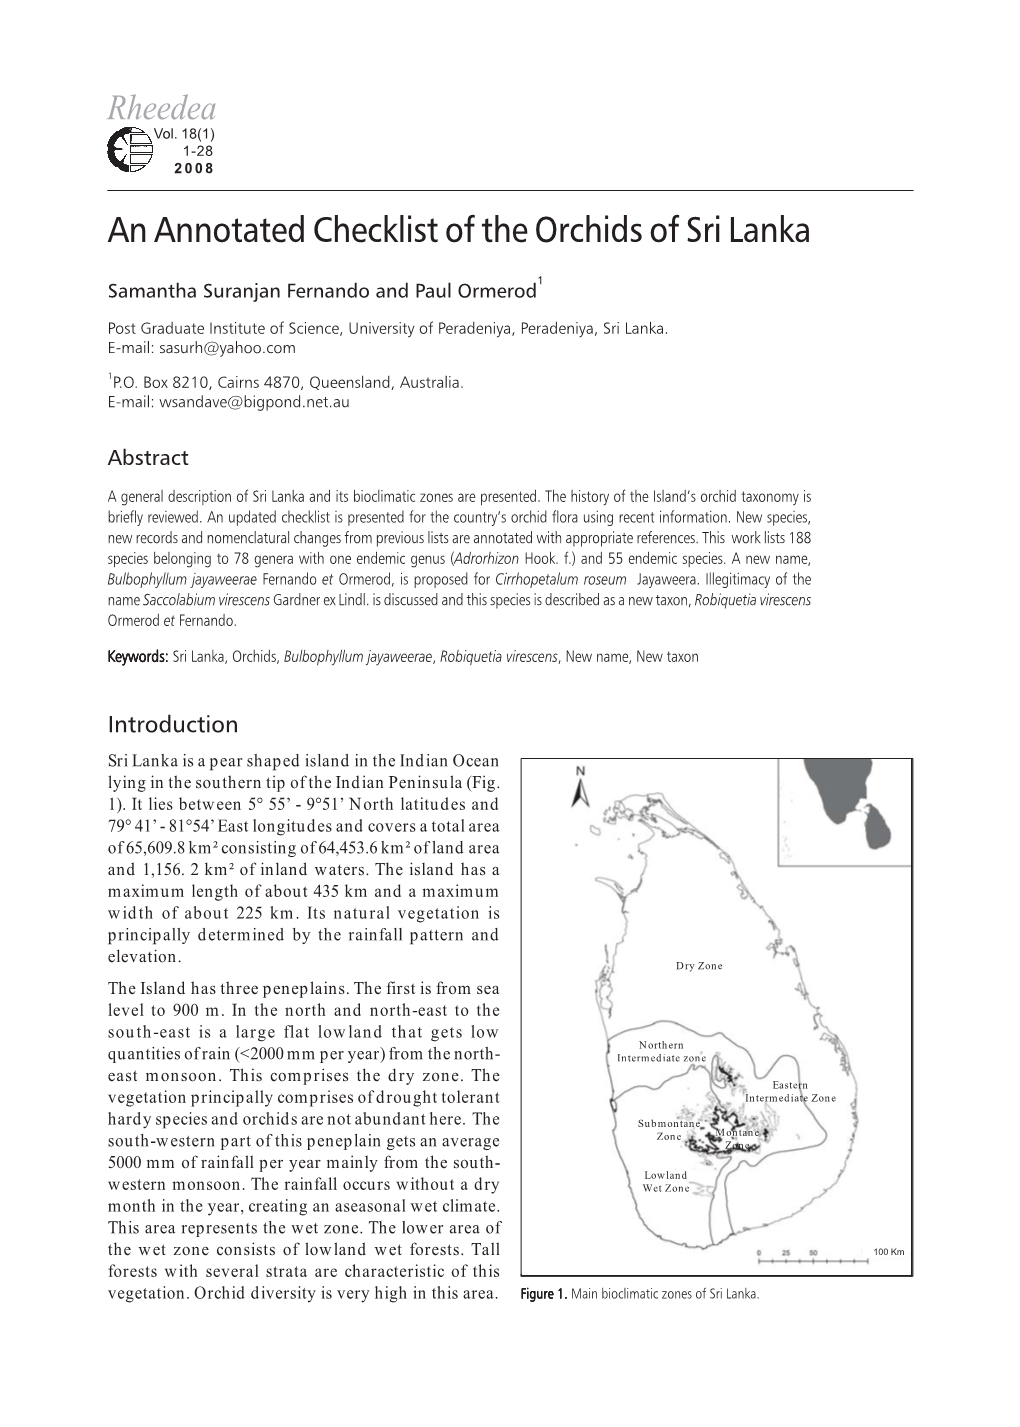 An Annotated Checklist of the Orchids of Sri Lanka, by Fernando And